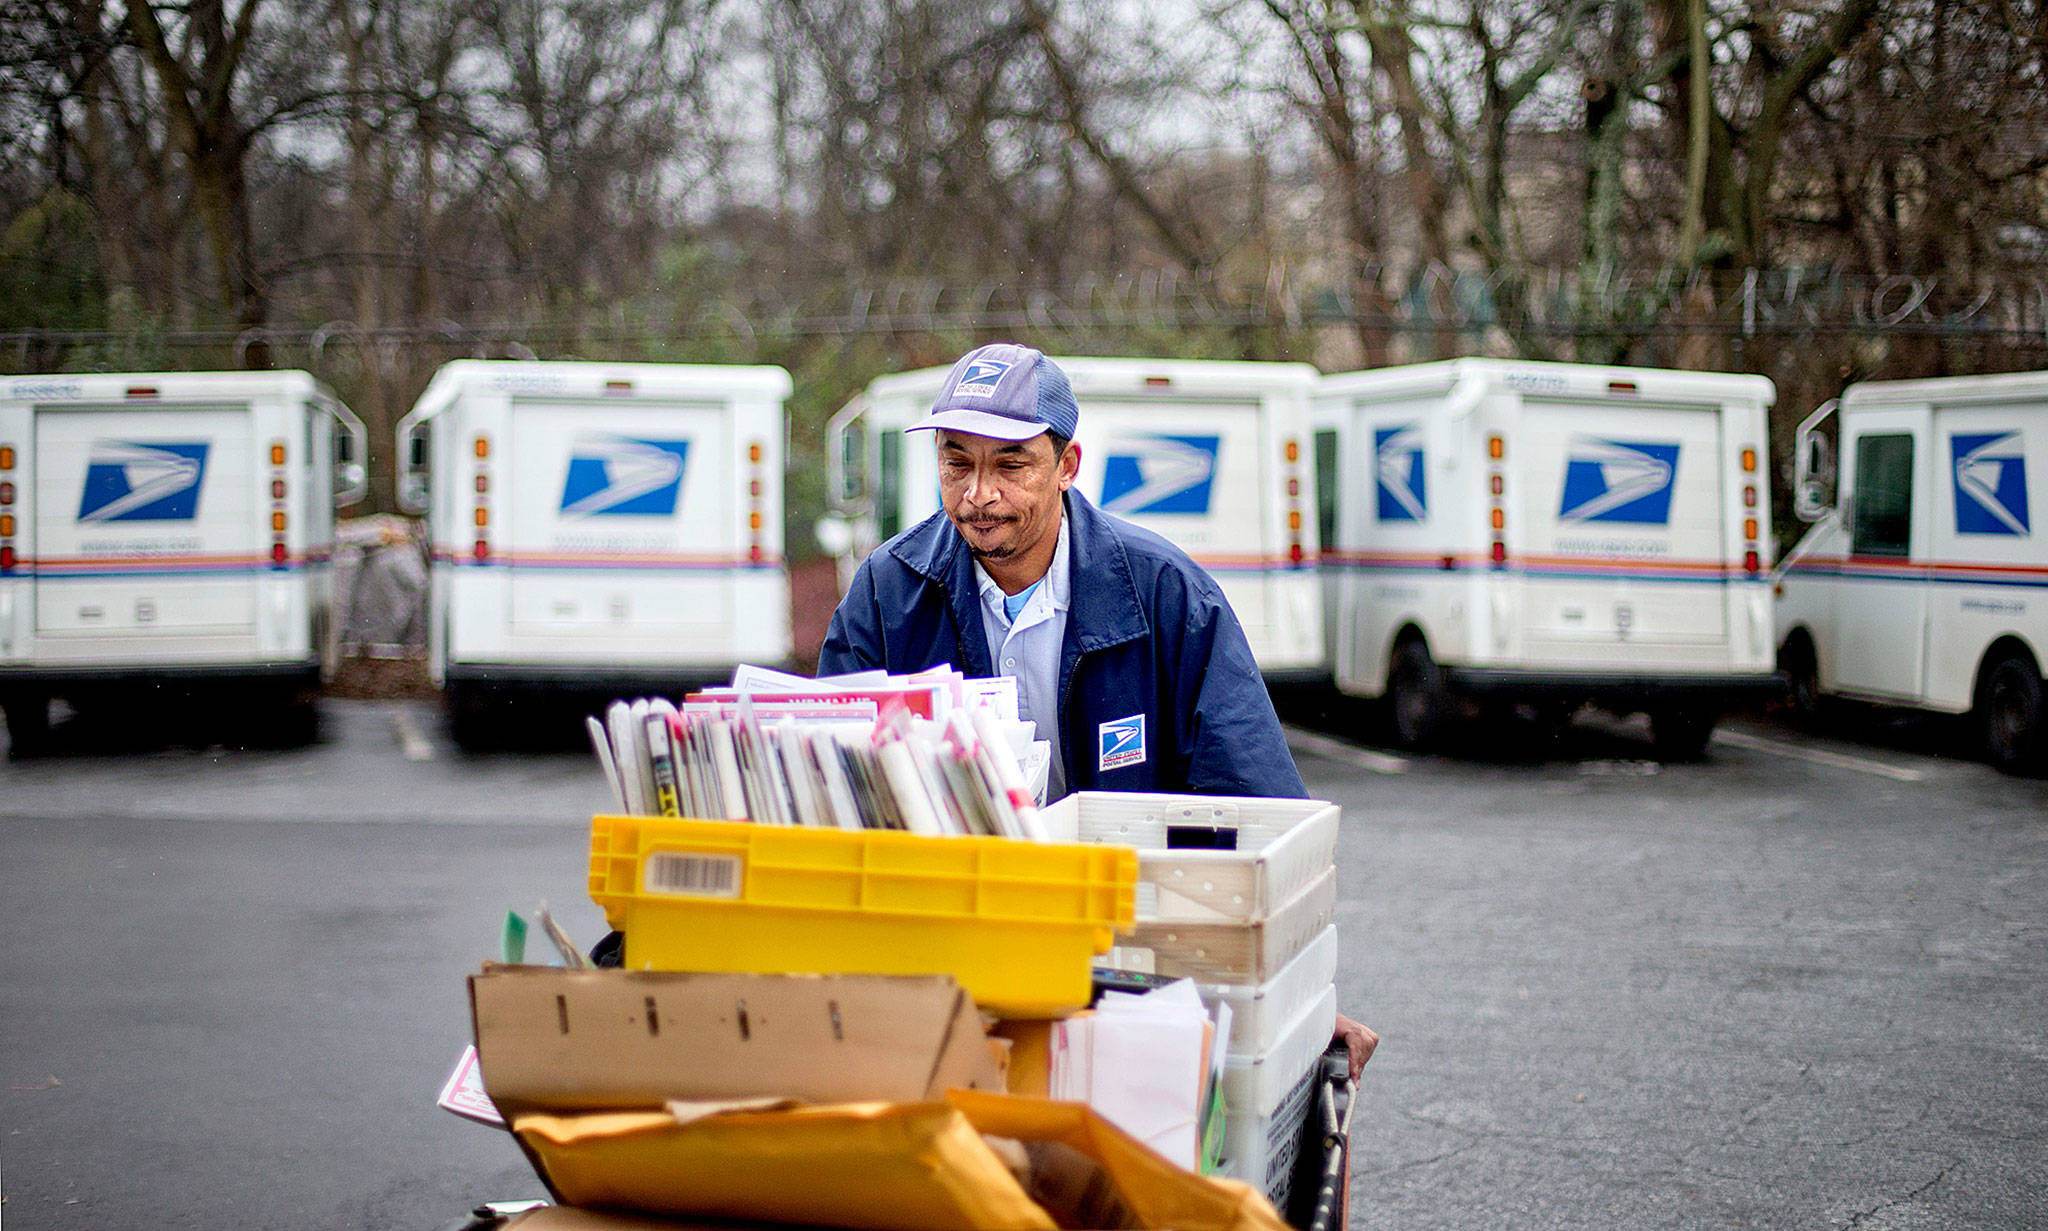 A U.S. Postal Service letter carrier gathers mail to load into his truck before making a delivery run in Atlanta. (AP Photo/David Goldman)